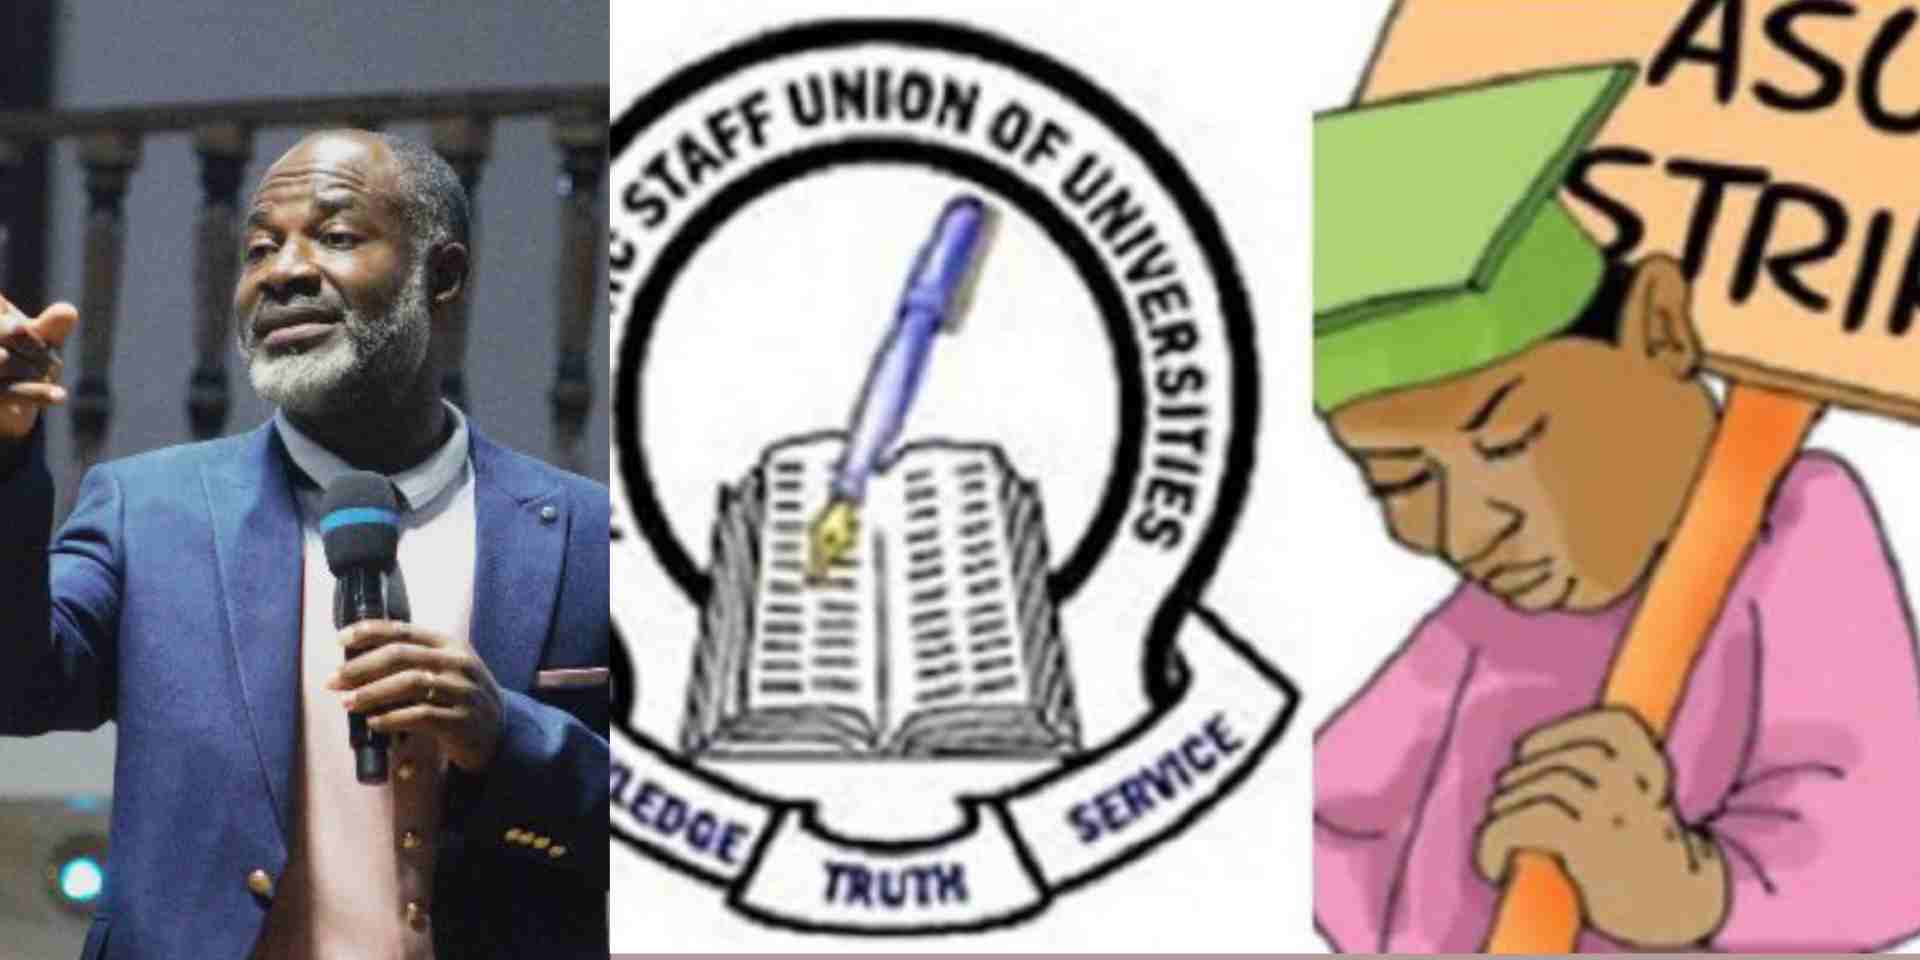 "Na wetin dey impossible my God dey do" - Pastor who claimed ASUU strike will end on 17th June reacts after clip went viral (Video)